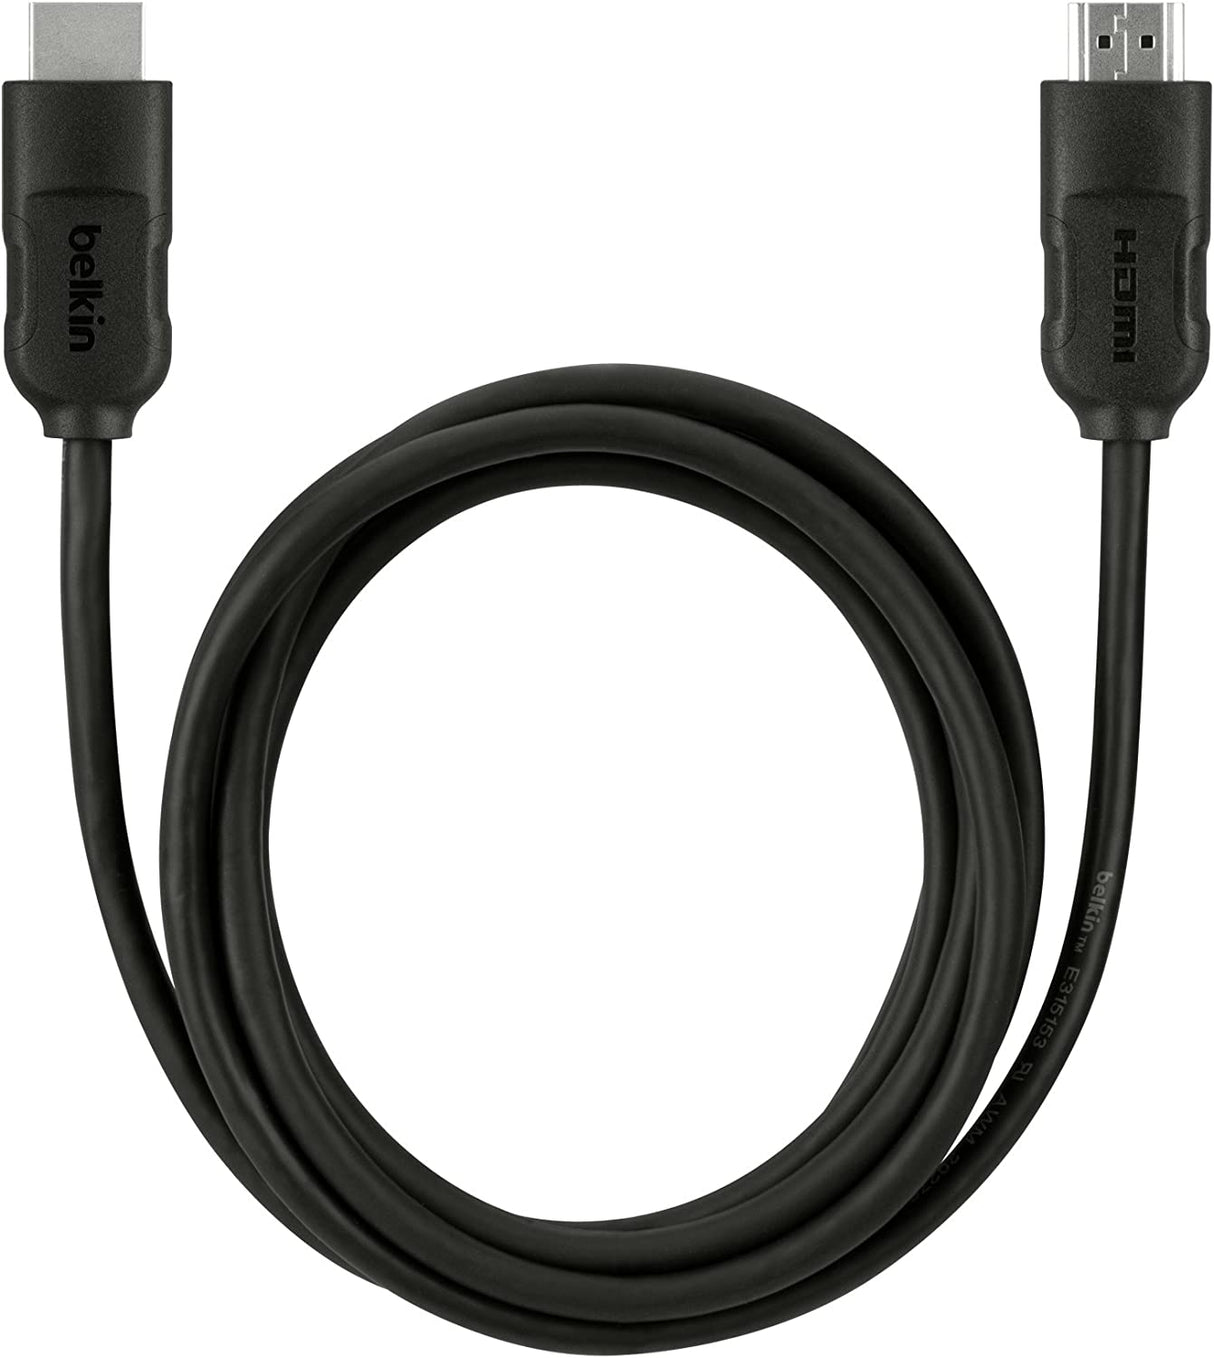 Belkin HDMI to HDMI Cable (Supports Amazon Fire TV and other HDMI-Enabled Devices), HDMI 2.0 / 4K Compatible, 25 Feet